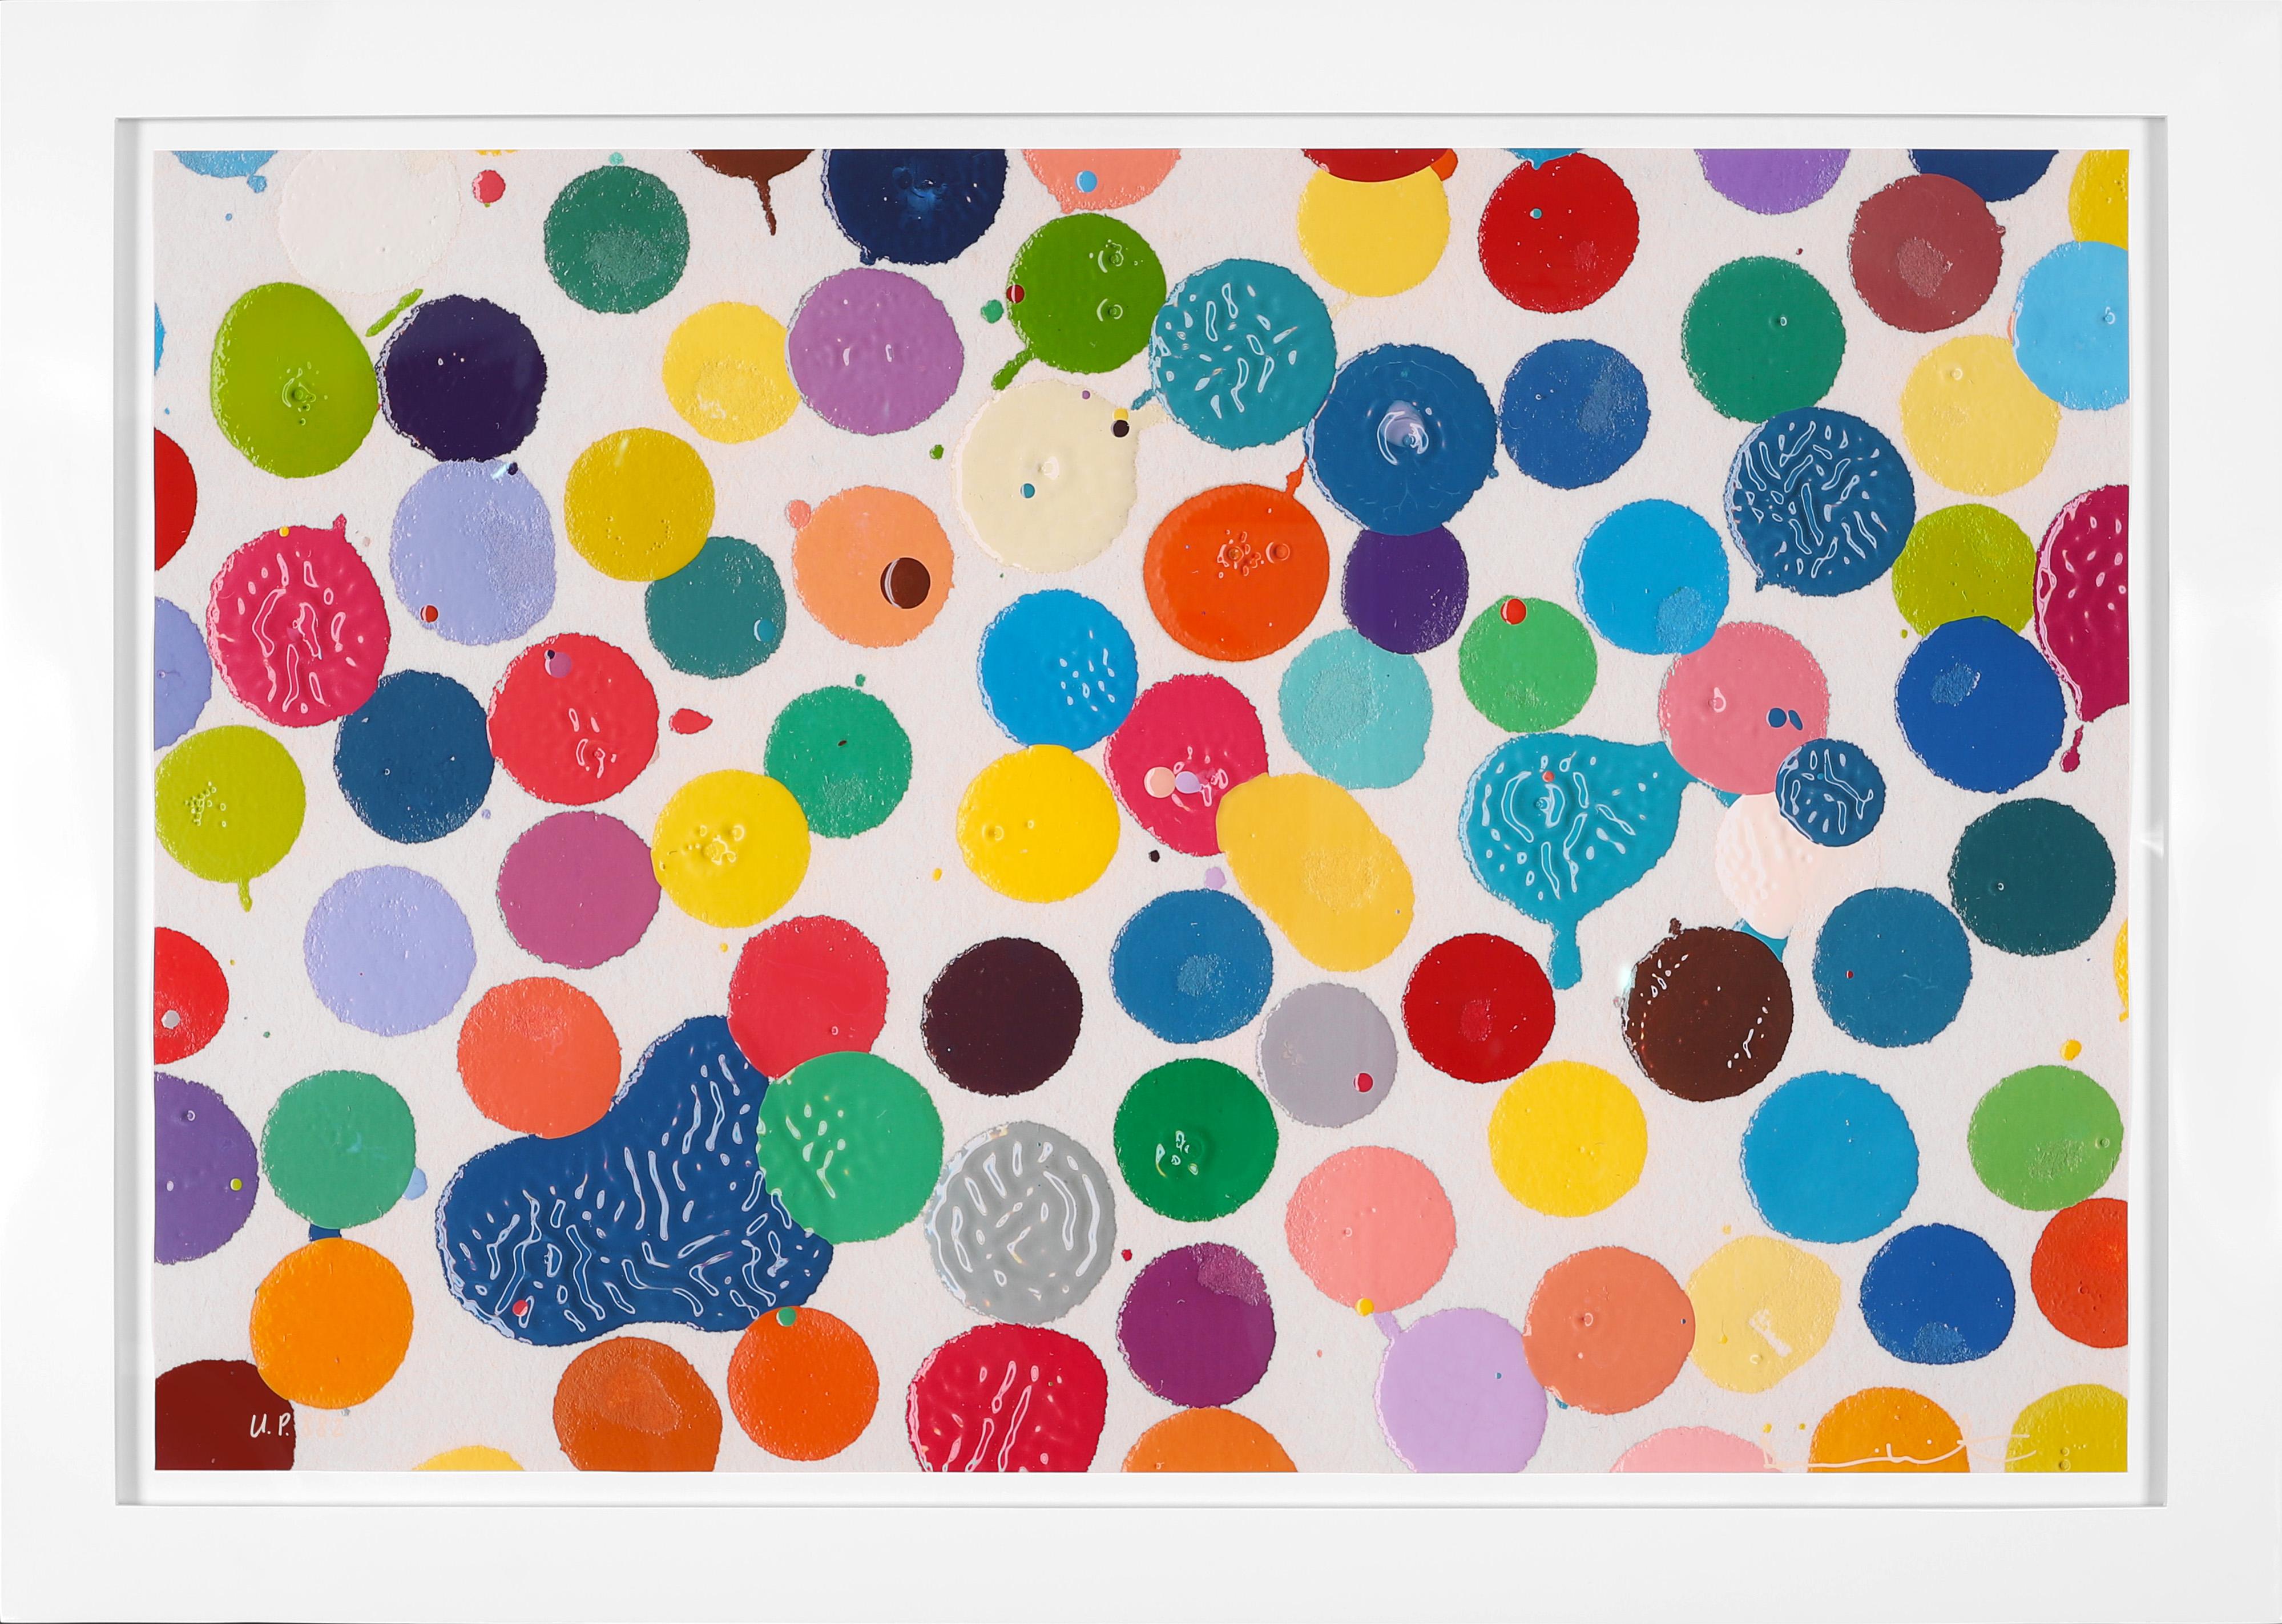 This large-scale iconic contemporary pop art 'Untitled' Spots is a multi-color monoprint by Damien Hirst is the only one of its kind printed. The quintessential bright color palette of unique hues have made the 'Spot Series' an international